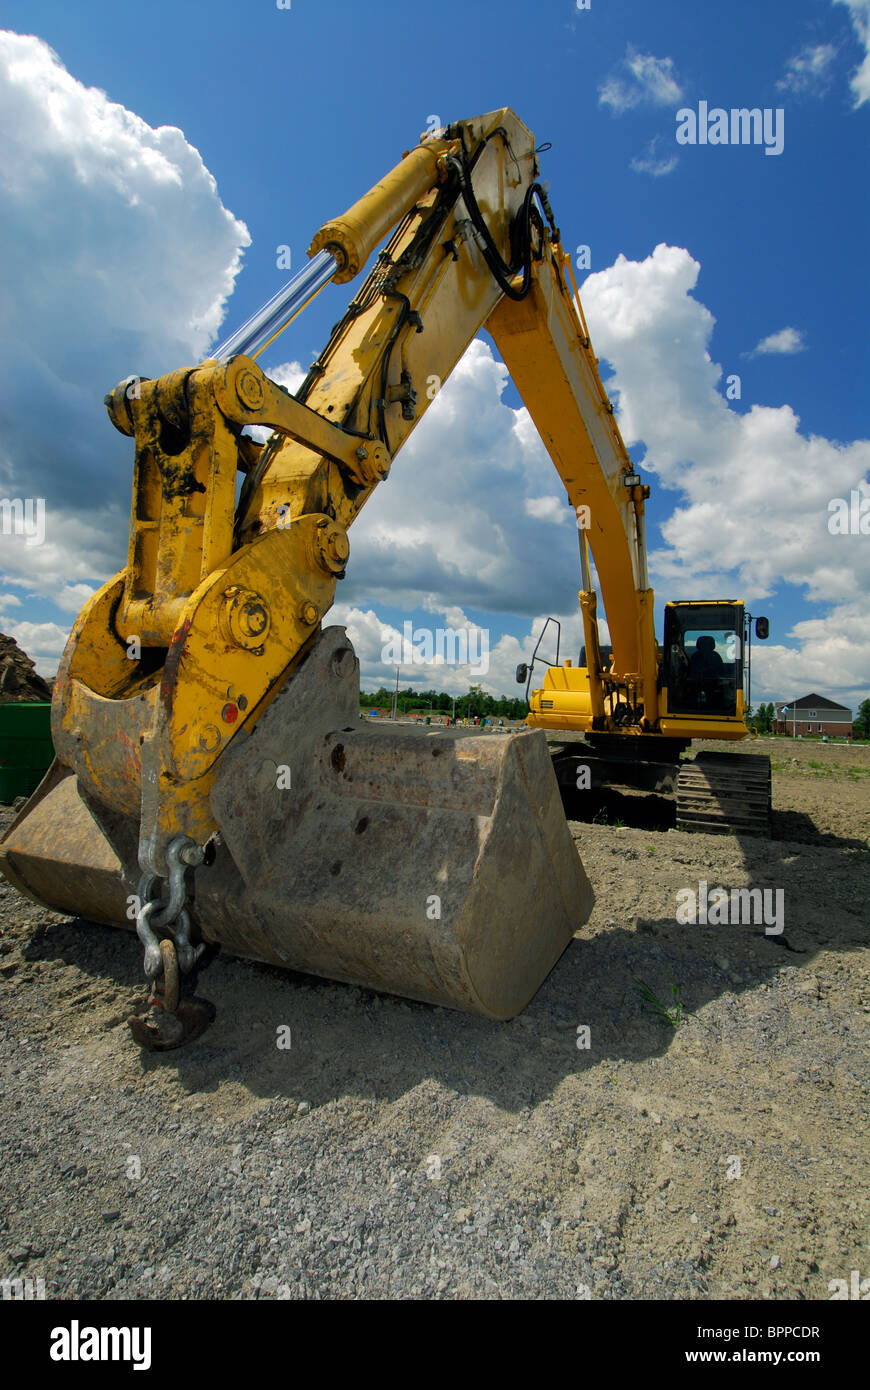 Yellow Front End Loader / Excavator On A Construction Site Stock Photo